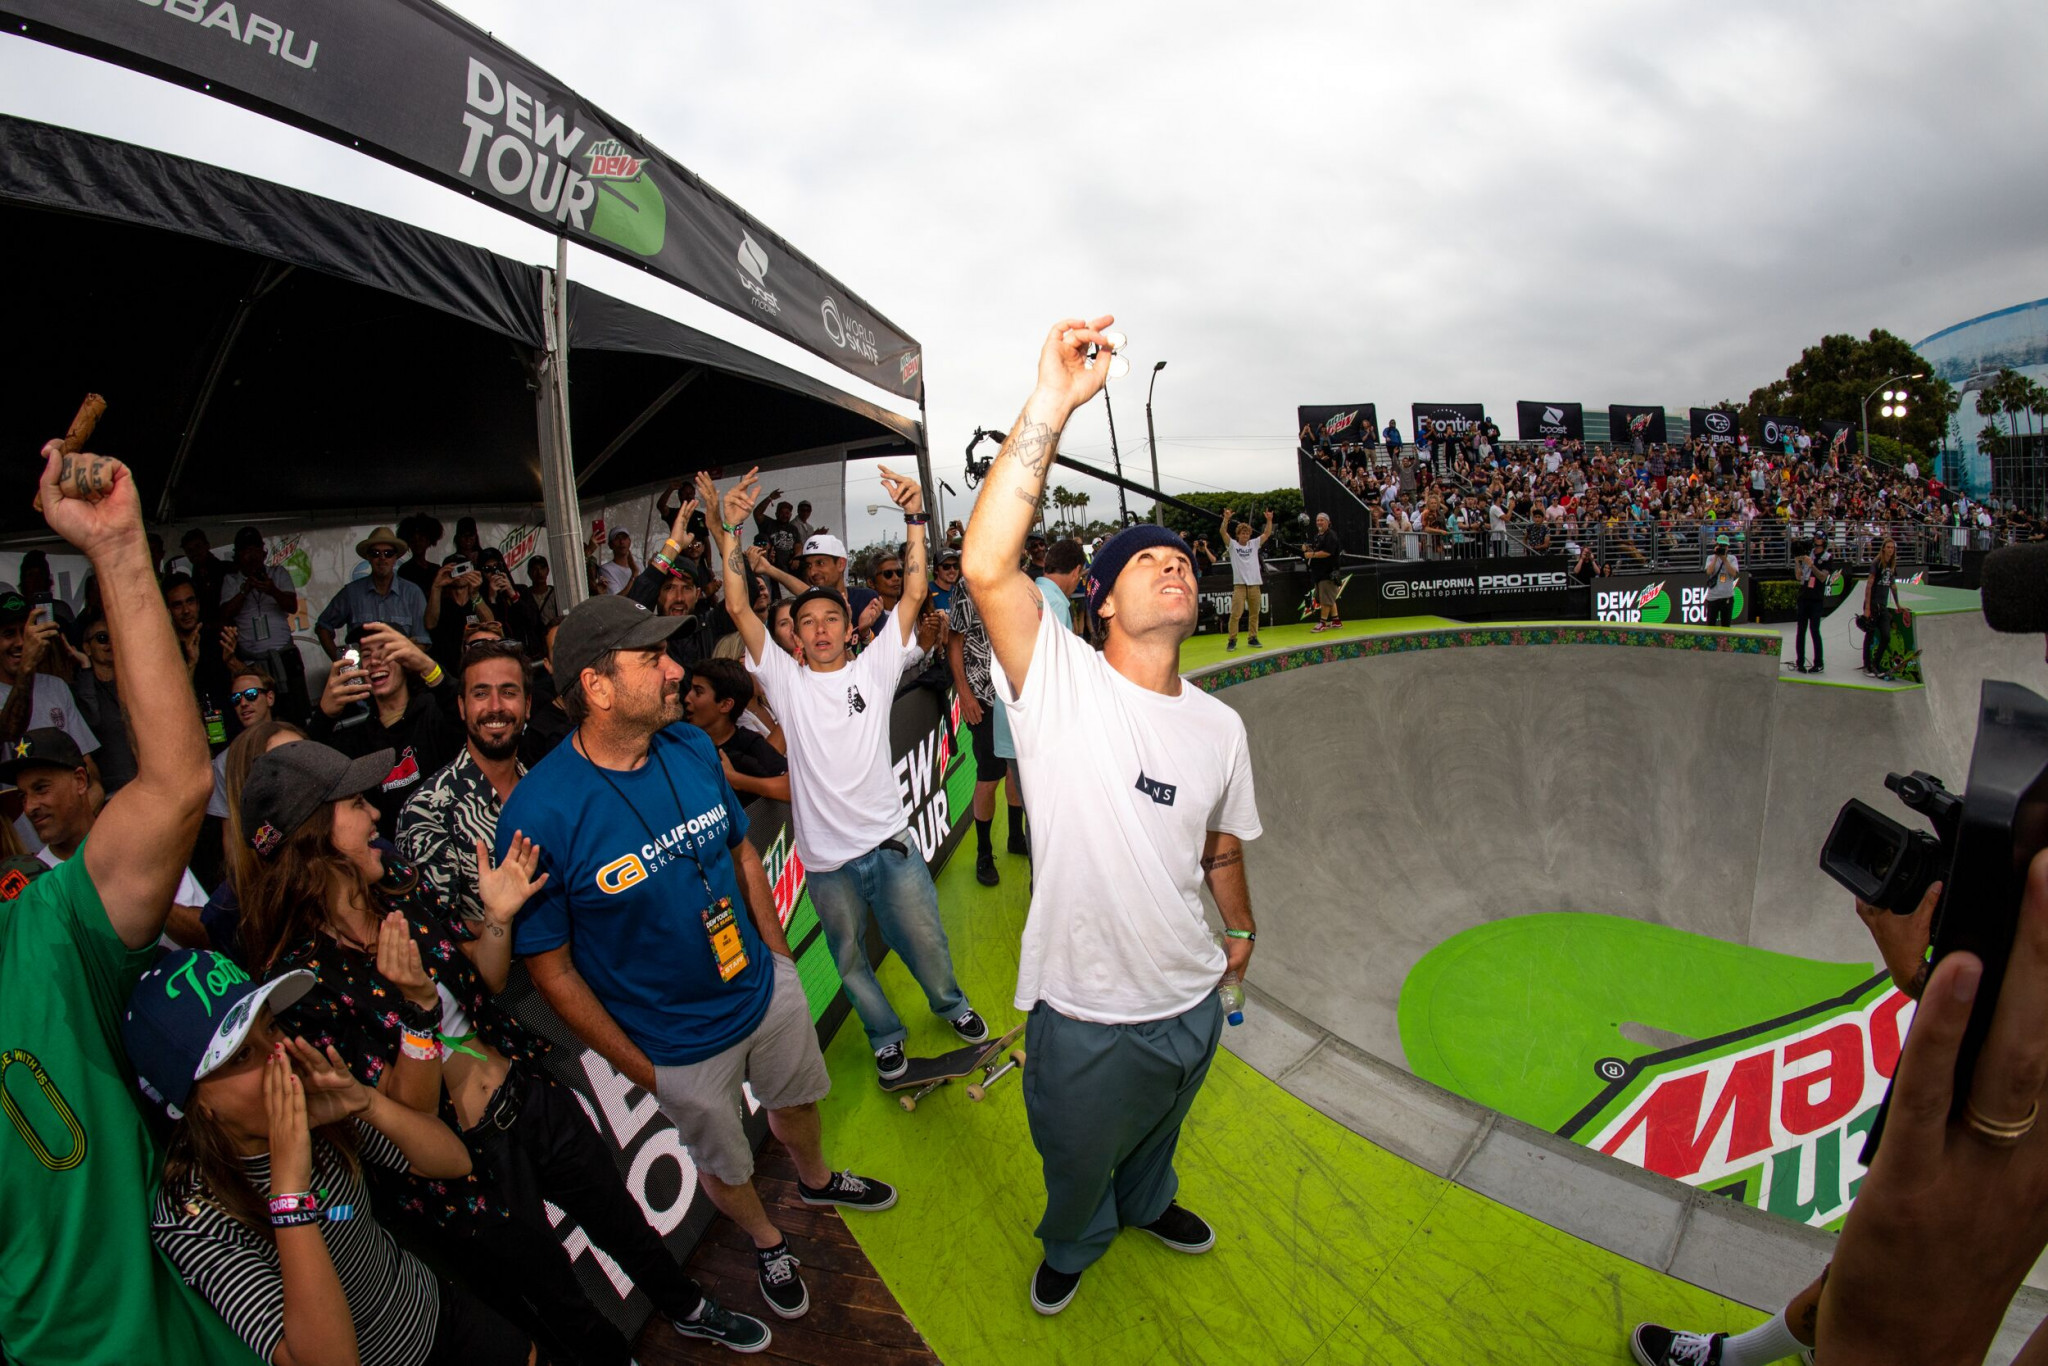 Pedro Barros of Brazil followed up his strong semi-final performance to win the men's park final ©Dew Tour